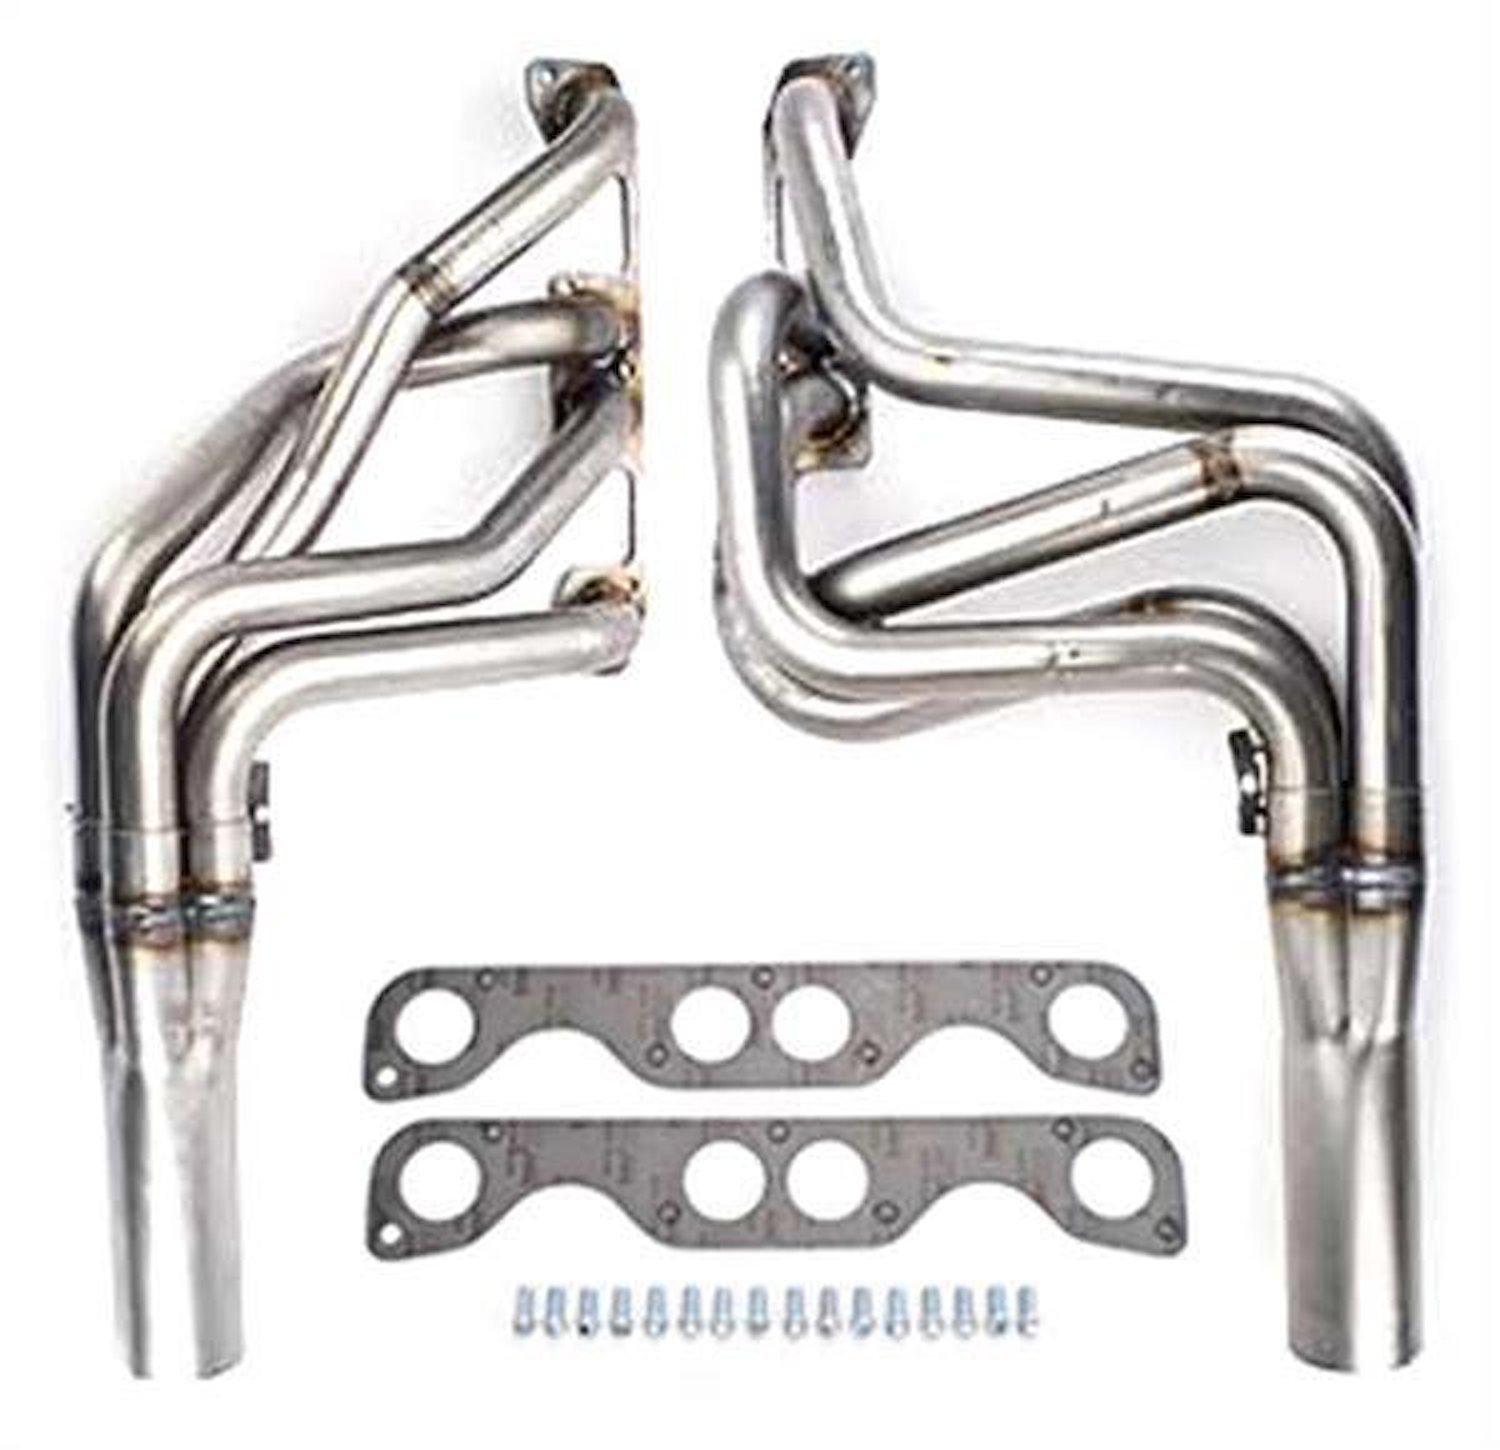 Street/Strip Long-Tube Race Headers 1983-1992 Chevy Camaro 283-400ci,1 3/4 in. Primary Tubes [Uncoated Finish]